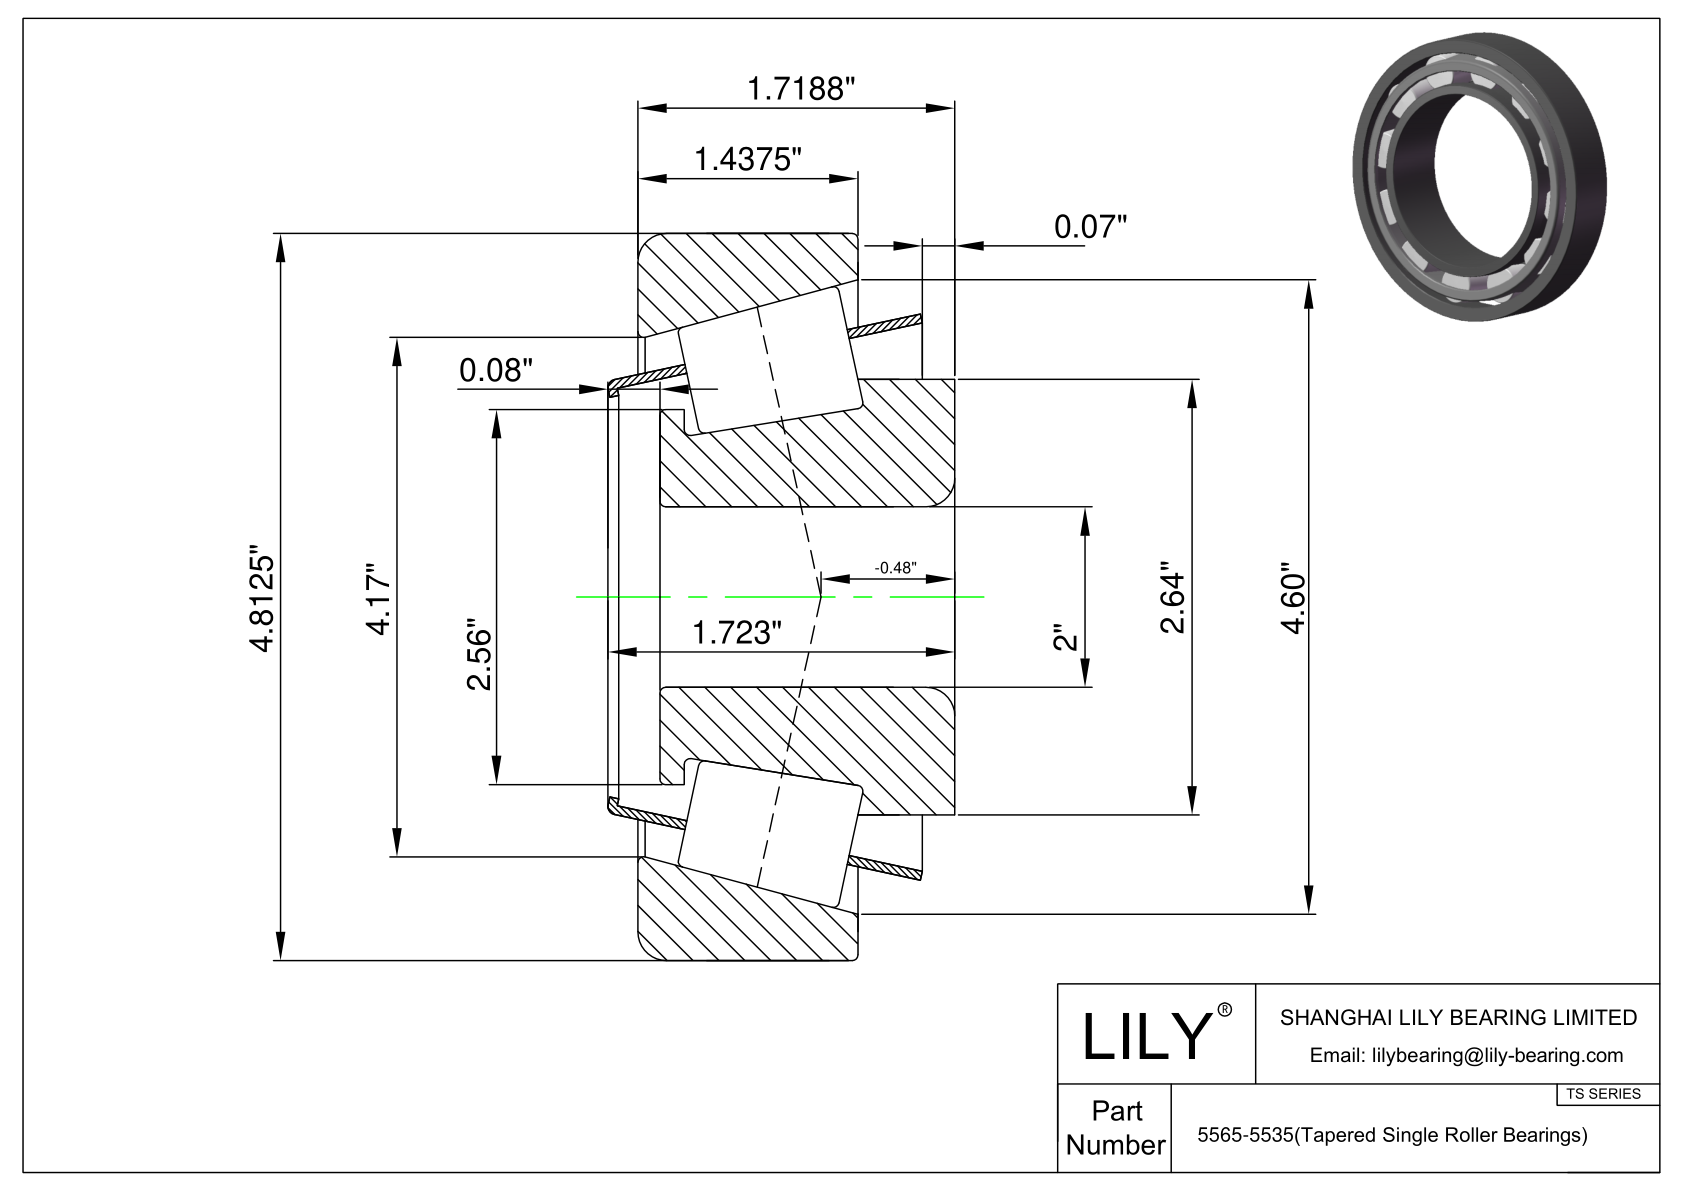 5565-5535 TS (Tapered Single Roller Bearings) (Imperial) cad drawing